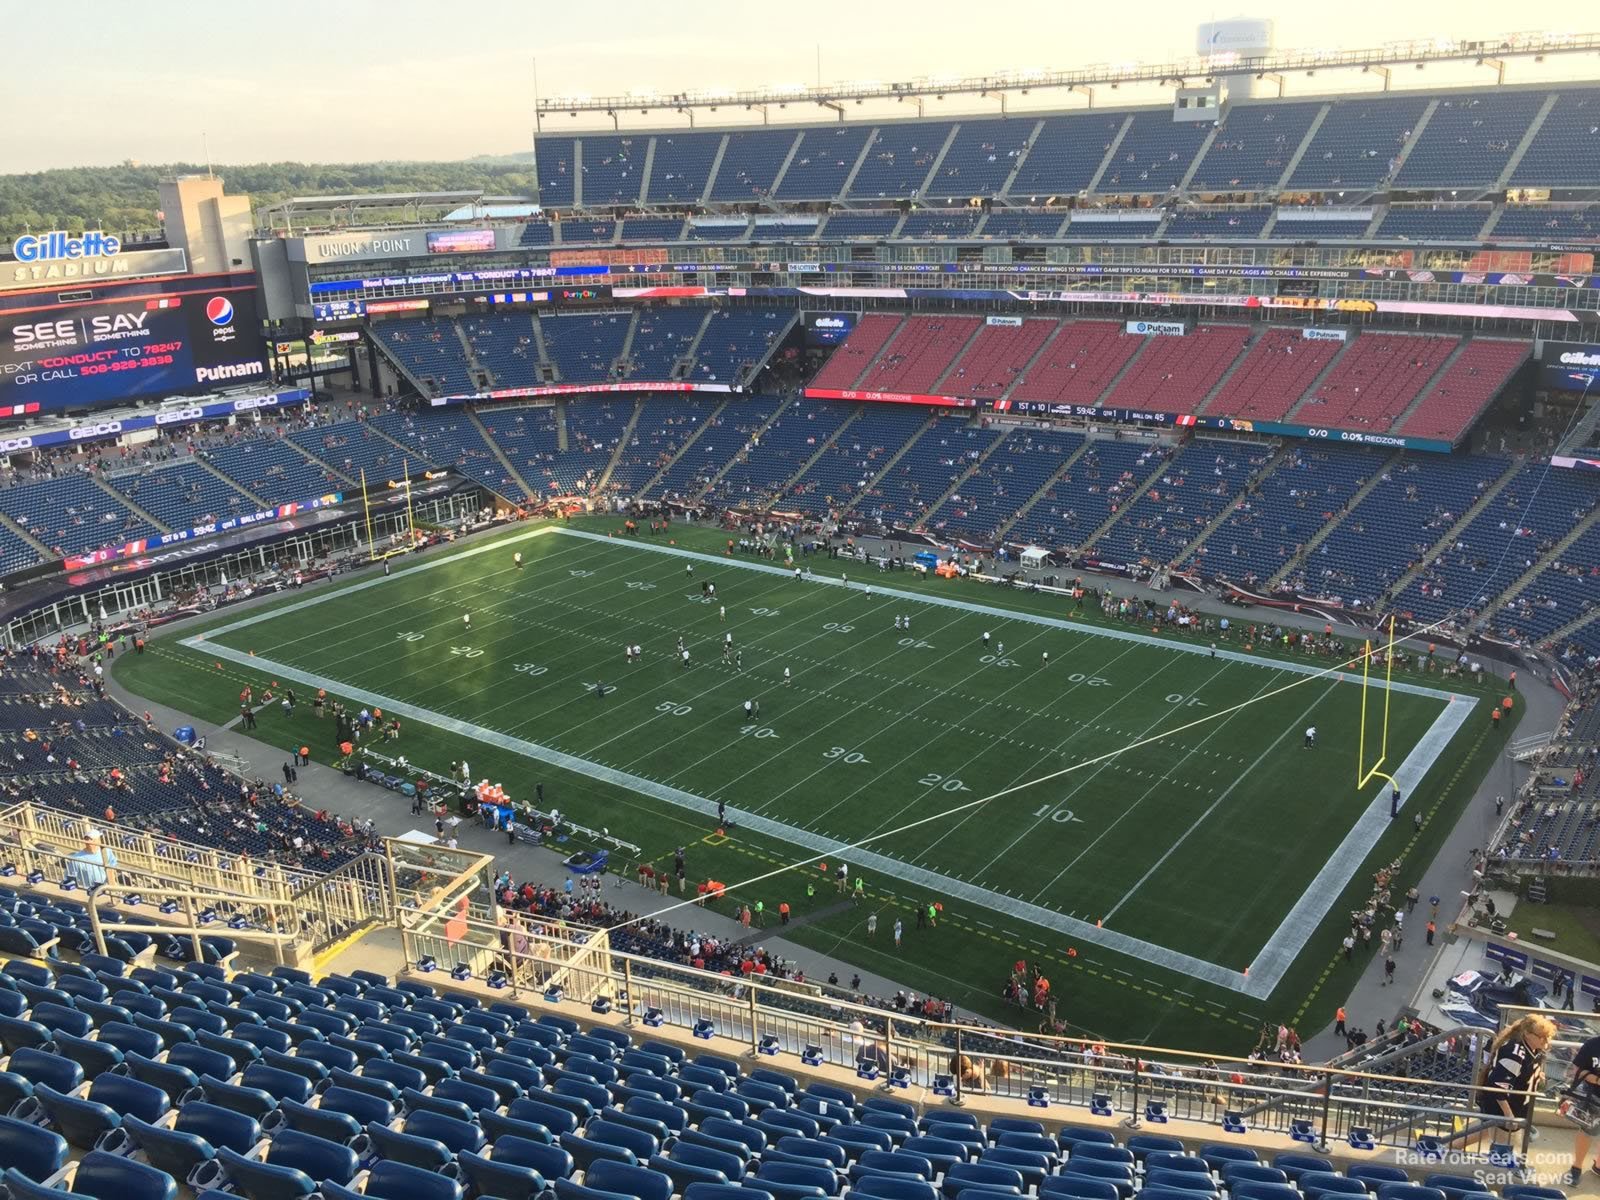 section 304, row 19 seat view  for football - gillette stadium